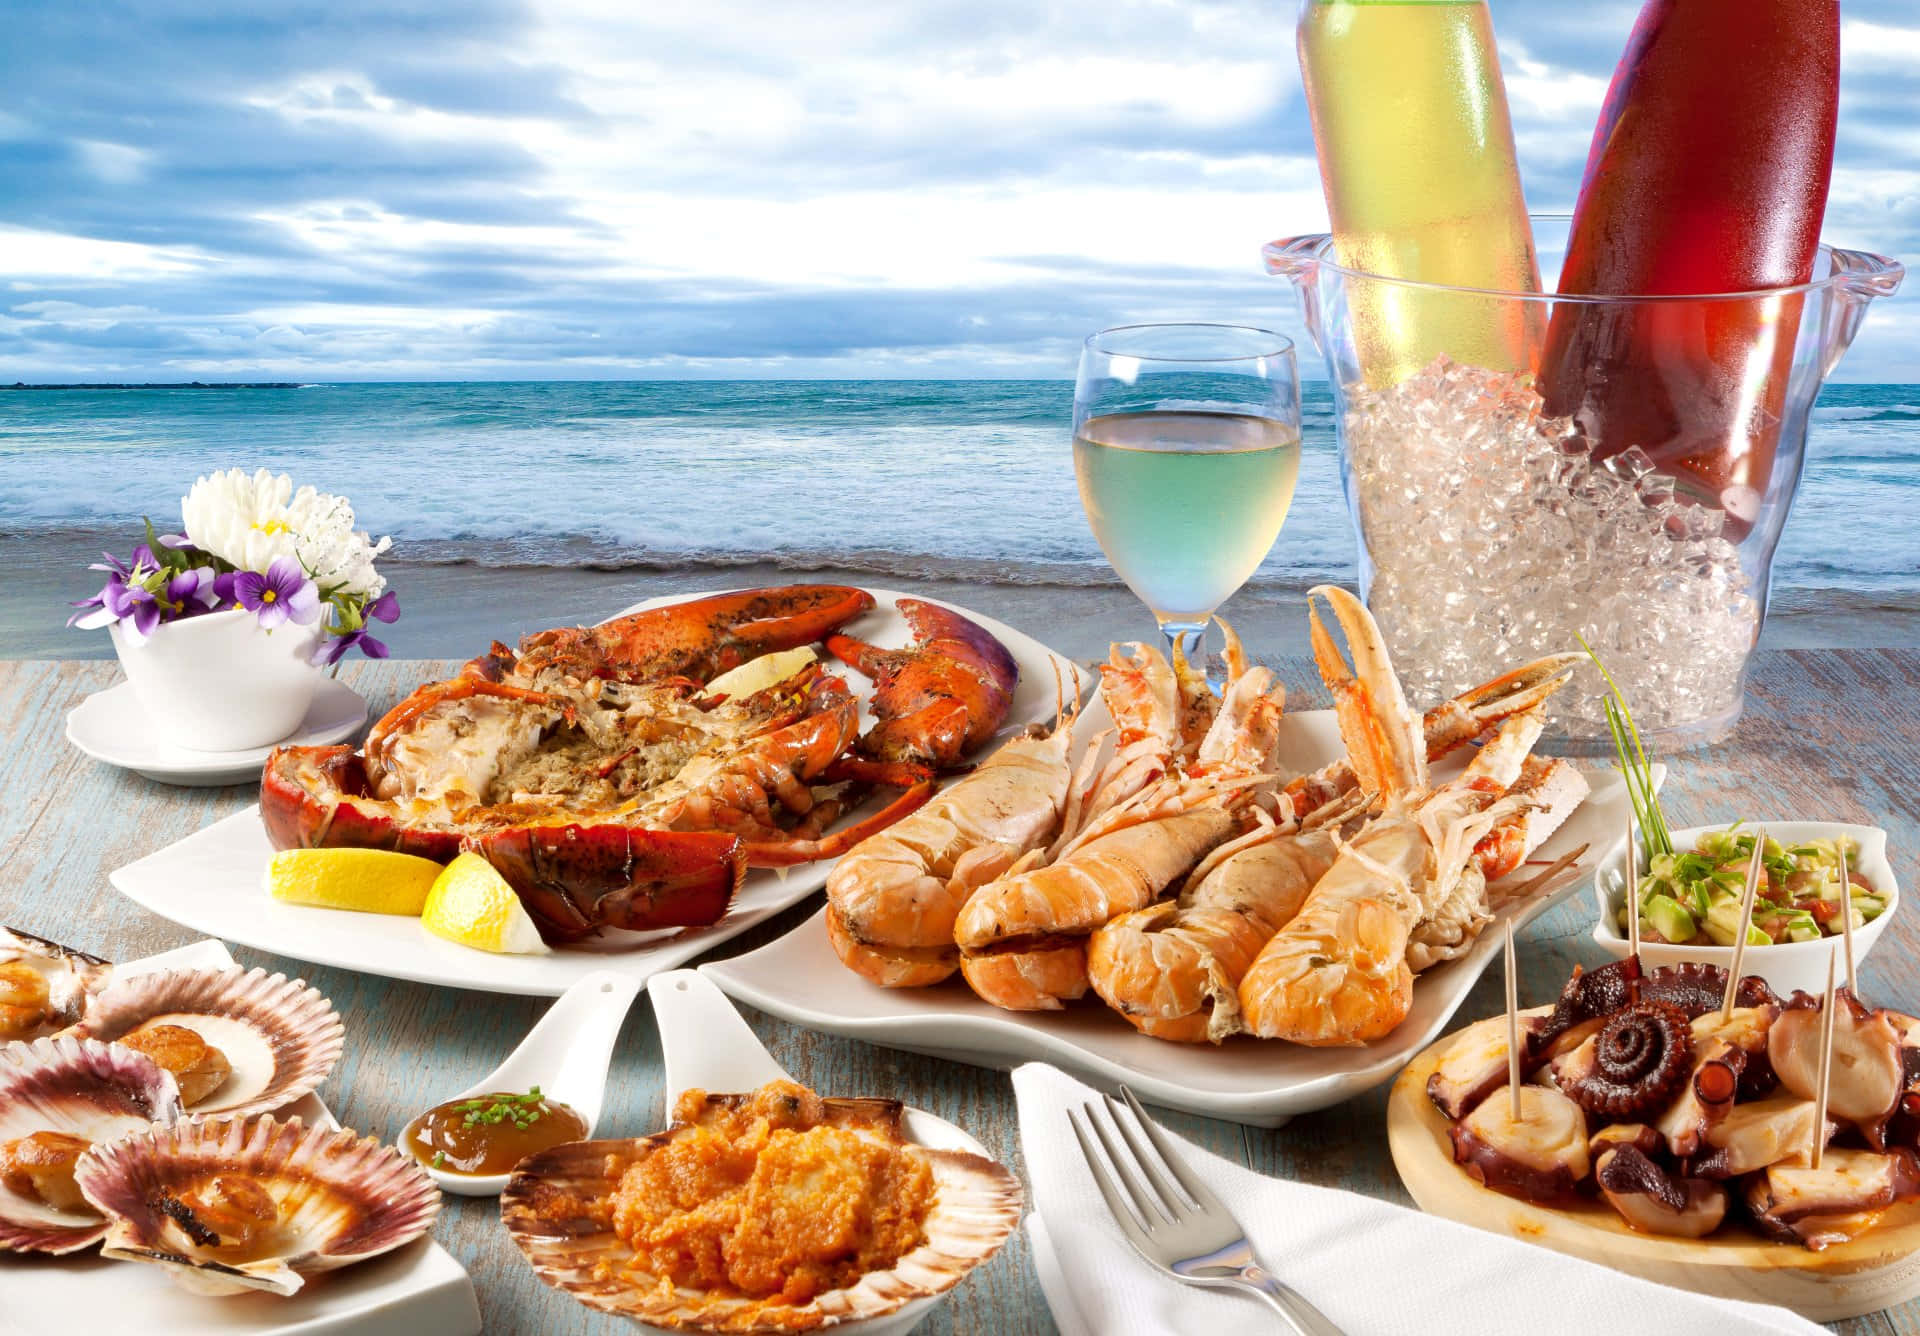 Enjoy a Delicious Plate of Fresh Seafood